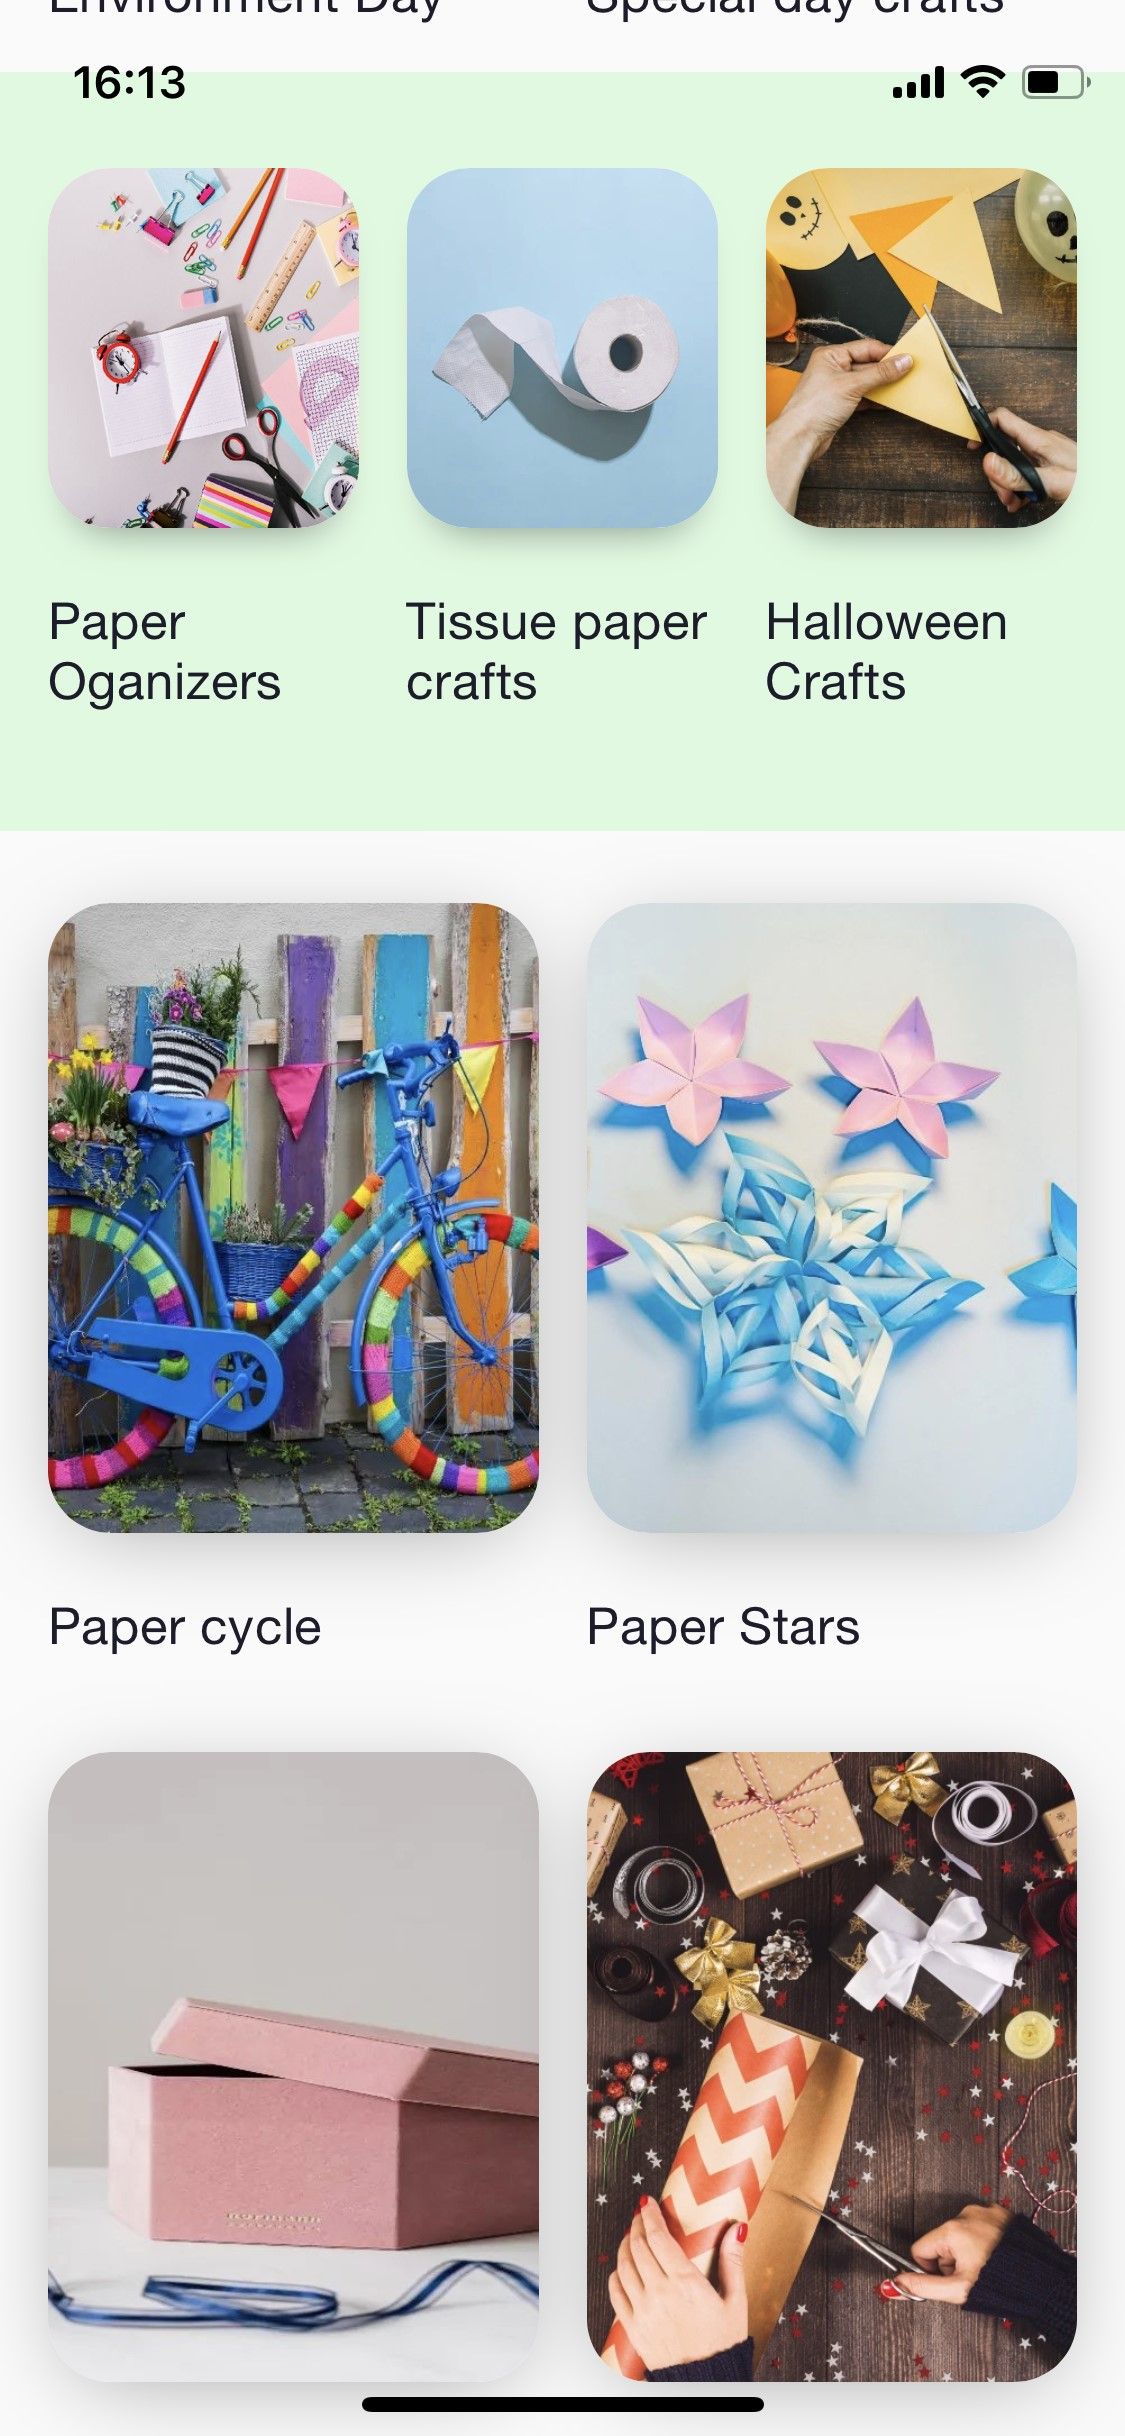 Learn Paper Crafts - screenshot of crafting ideas